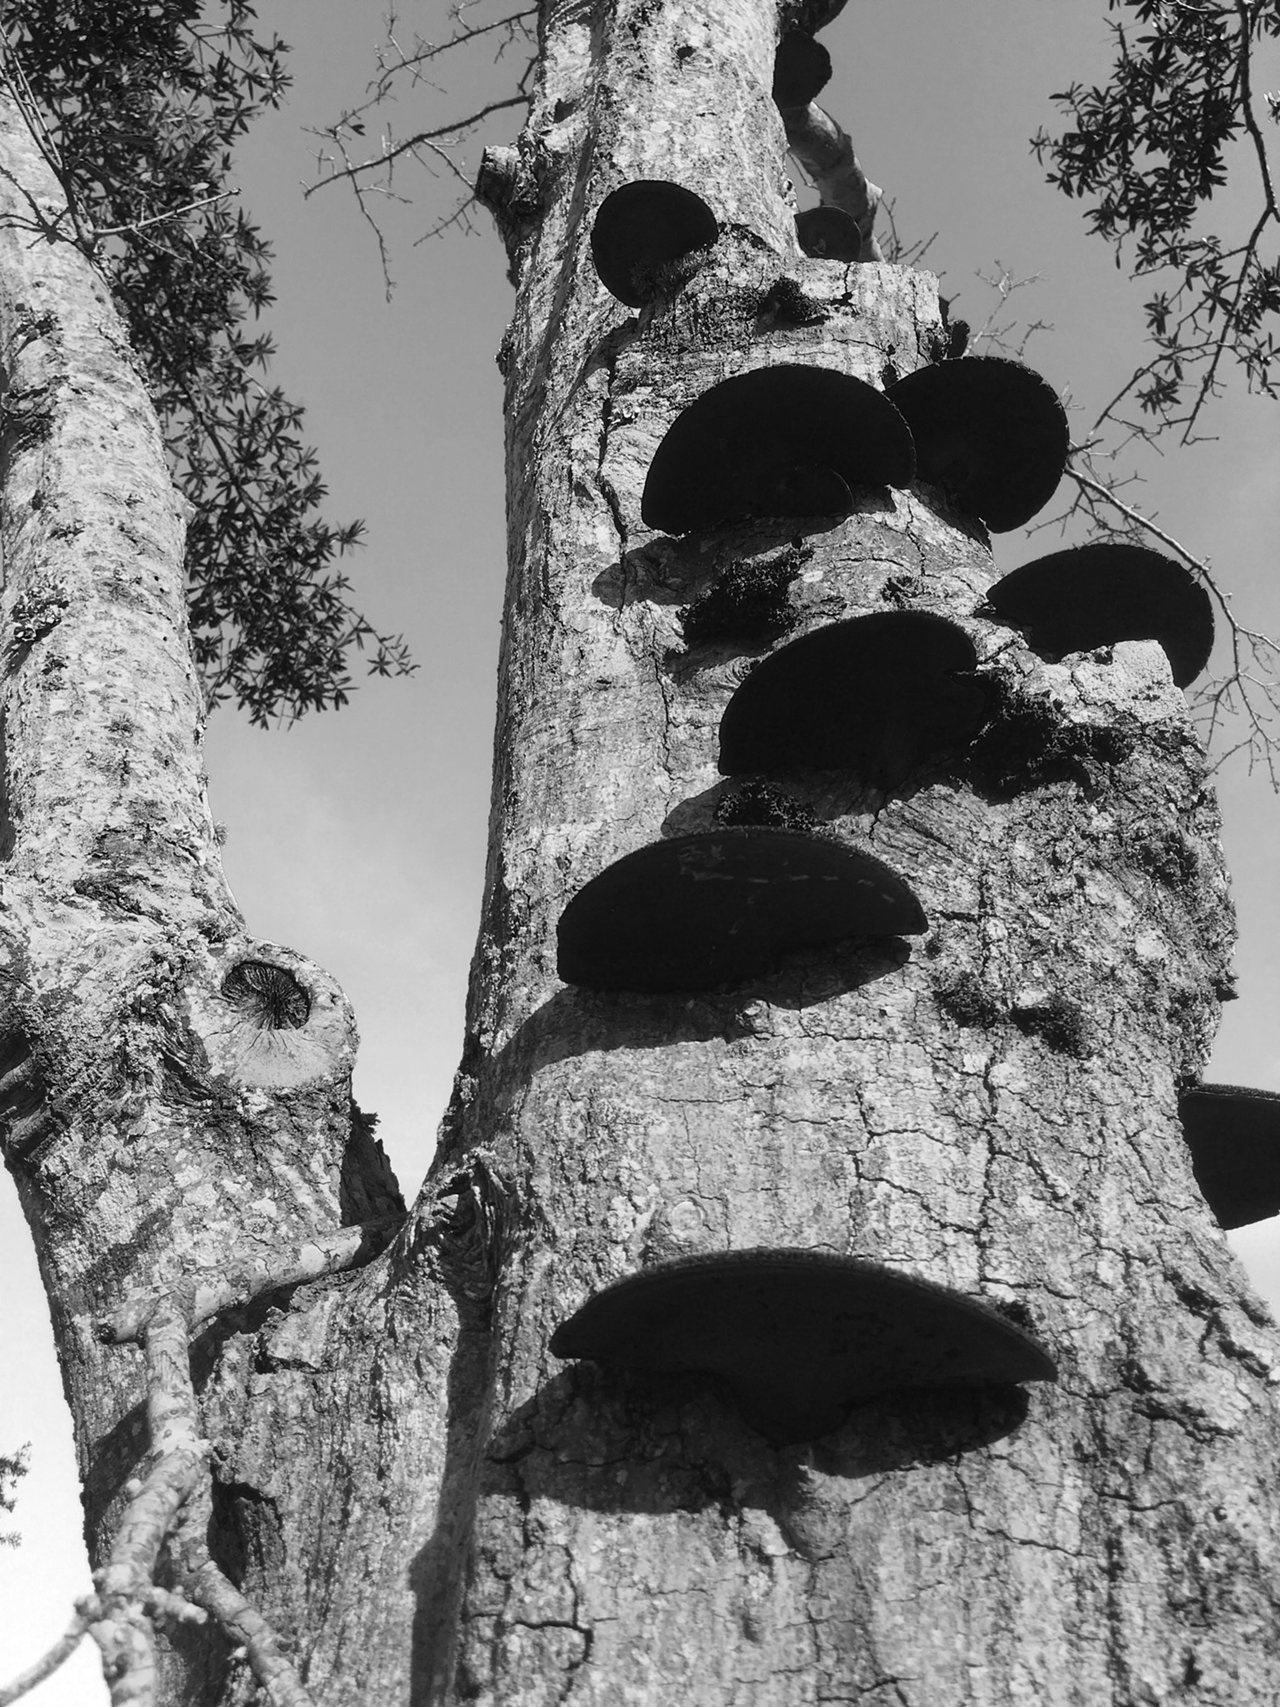 Nature's Ladder (apps: ProCamera to shoot, BlackCam to convert to black and white).